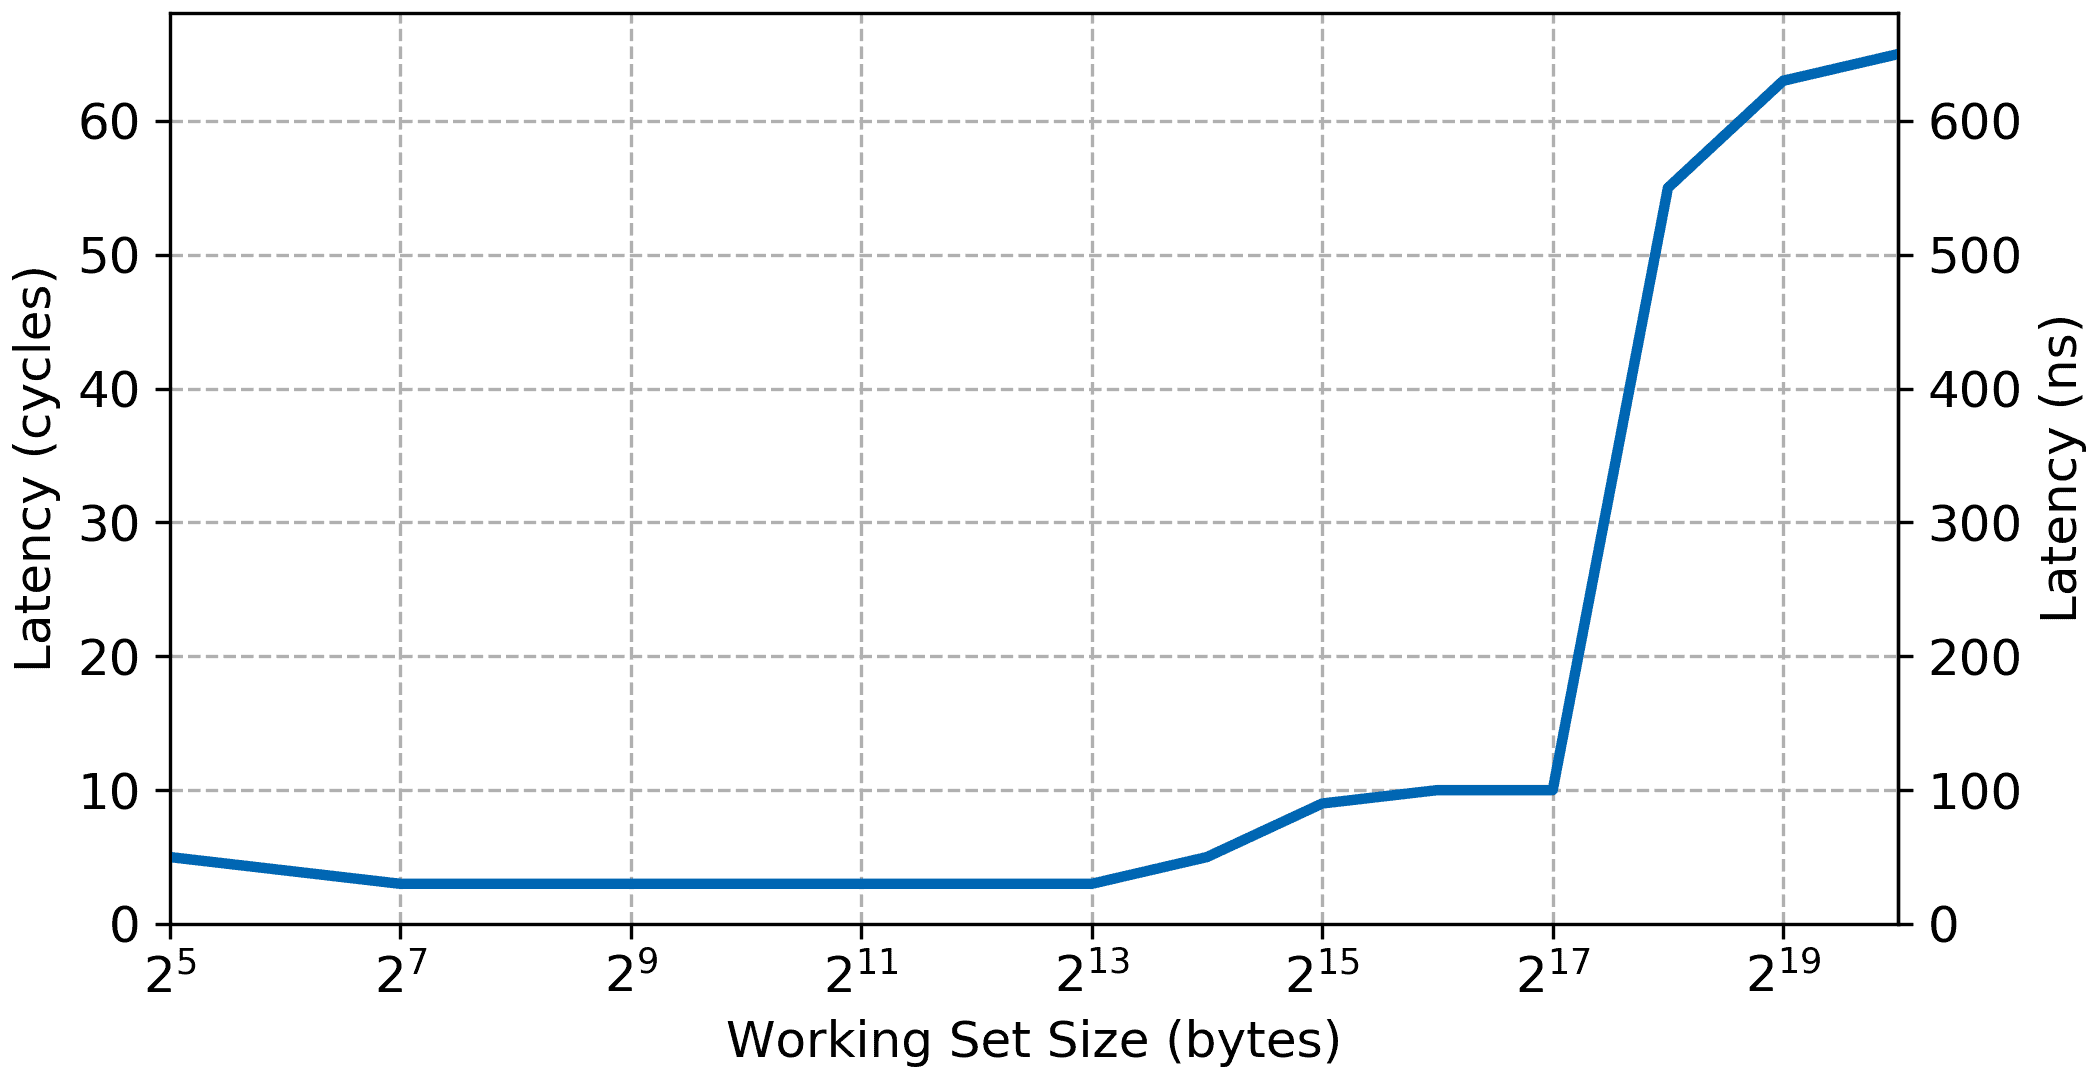 Plot of the Microblaze memory read access latency versus the working set size when running from external DDR SDRAM memory with 16KiB of level 1 cache and 128 KiB of level 2 cache.